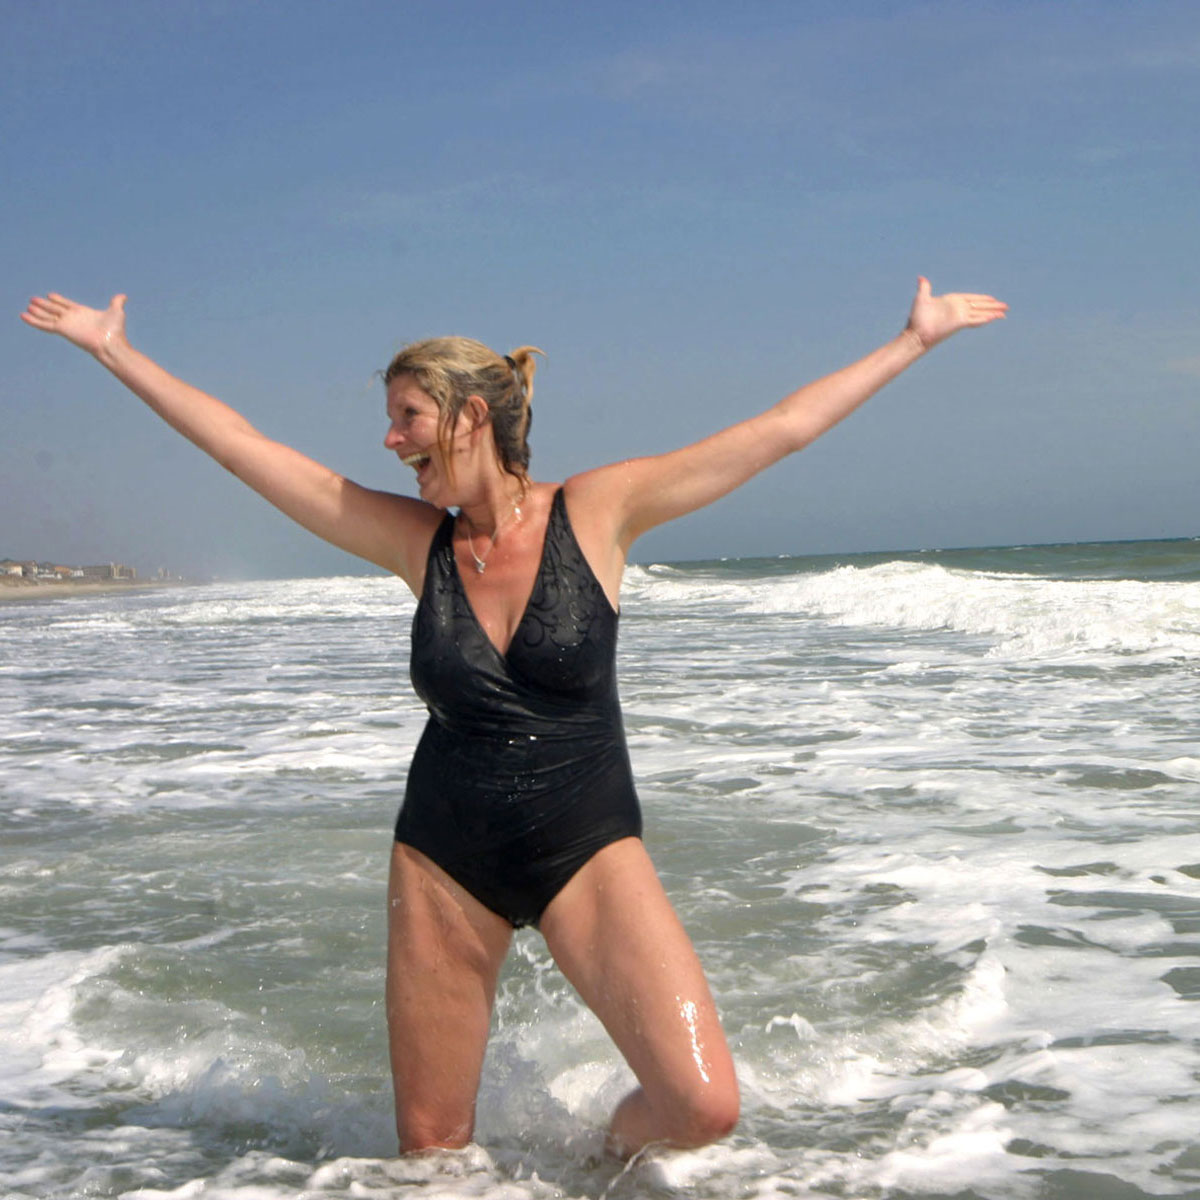 A woman in a black, one-piece bathing suit tosses her hands in the air while standing in shallow water